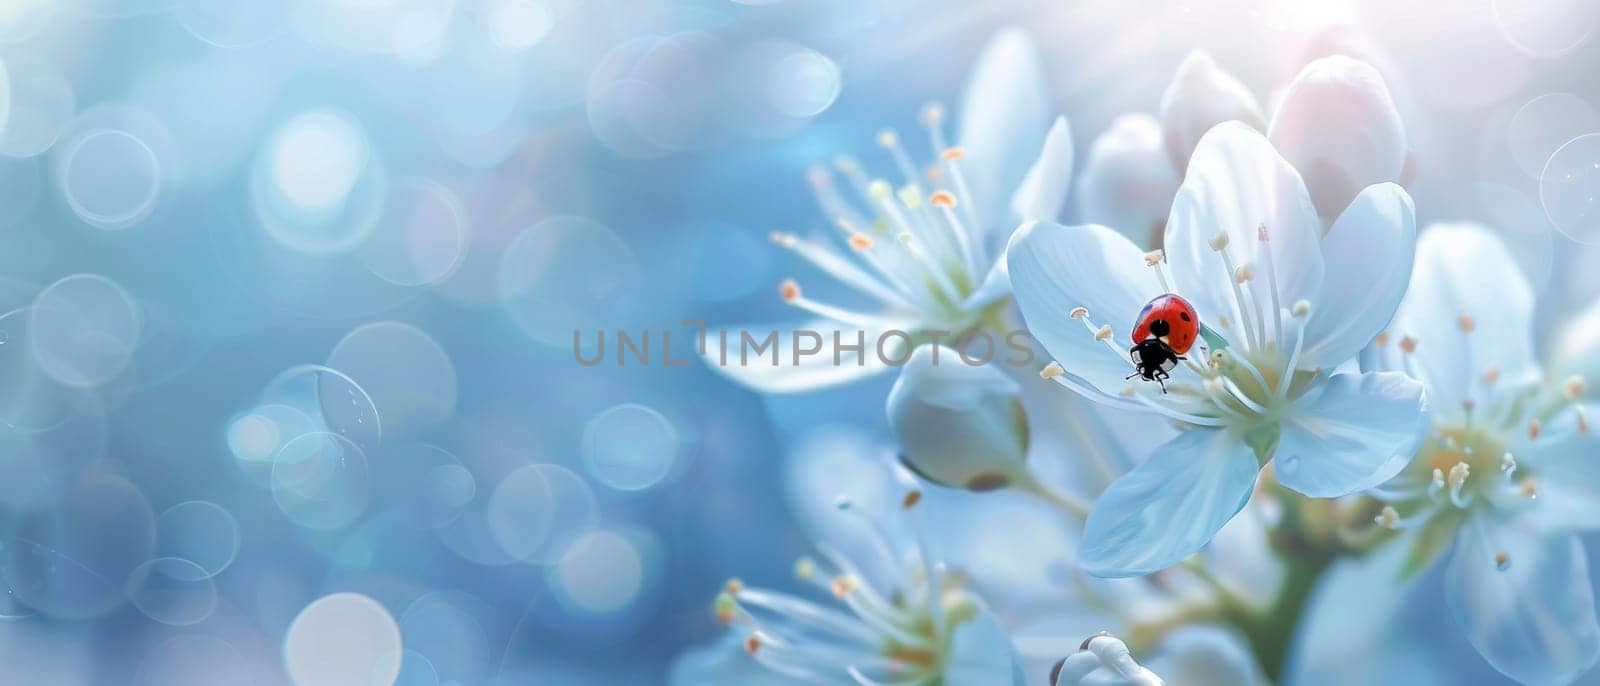 A beautiful flower with a ladybug on it by AI generated image.